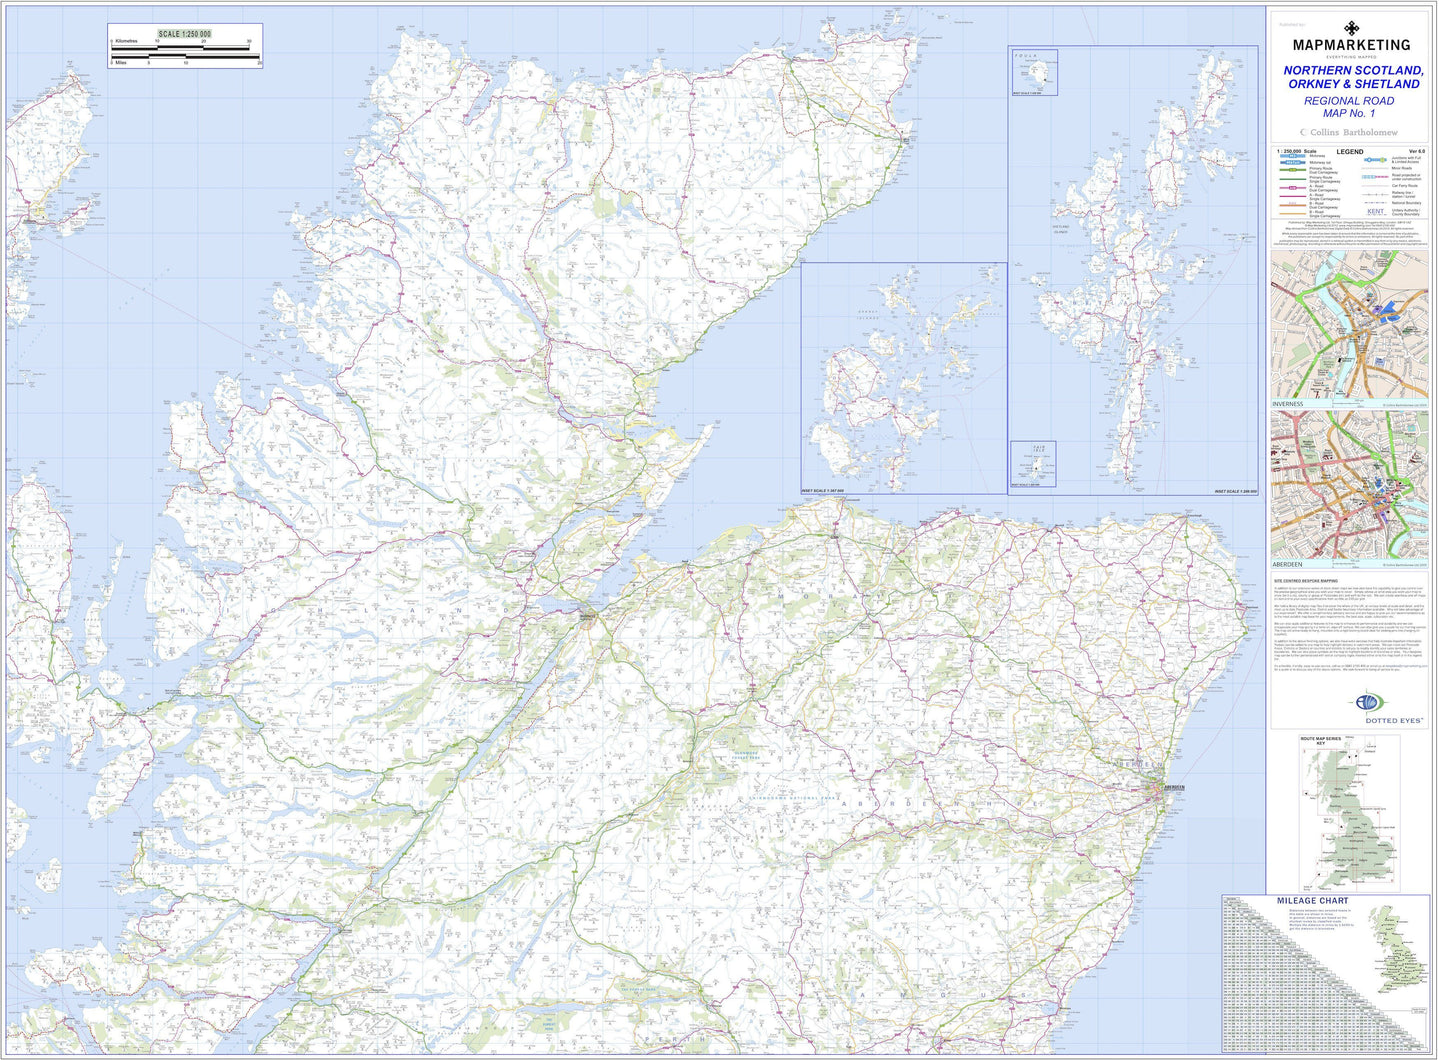 Wall Maps Northern Scotland Orkney And Shetland Regional Road Map Wall Map 1 1 720x@2x ?v=1524498433